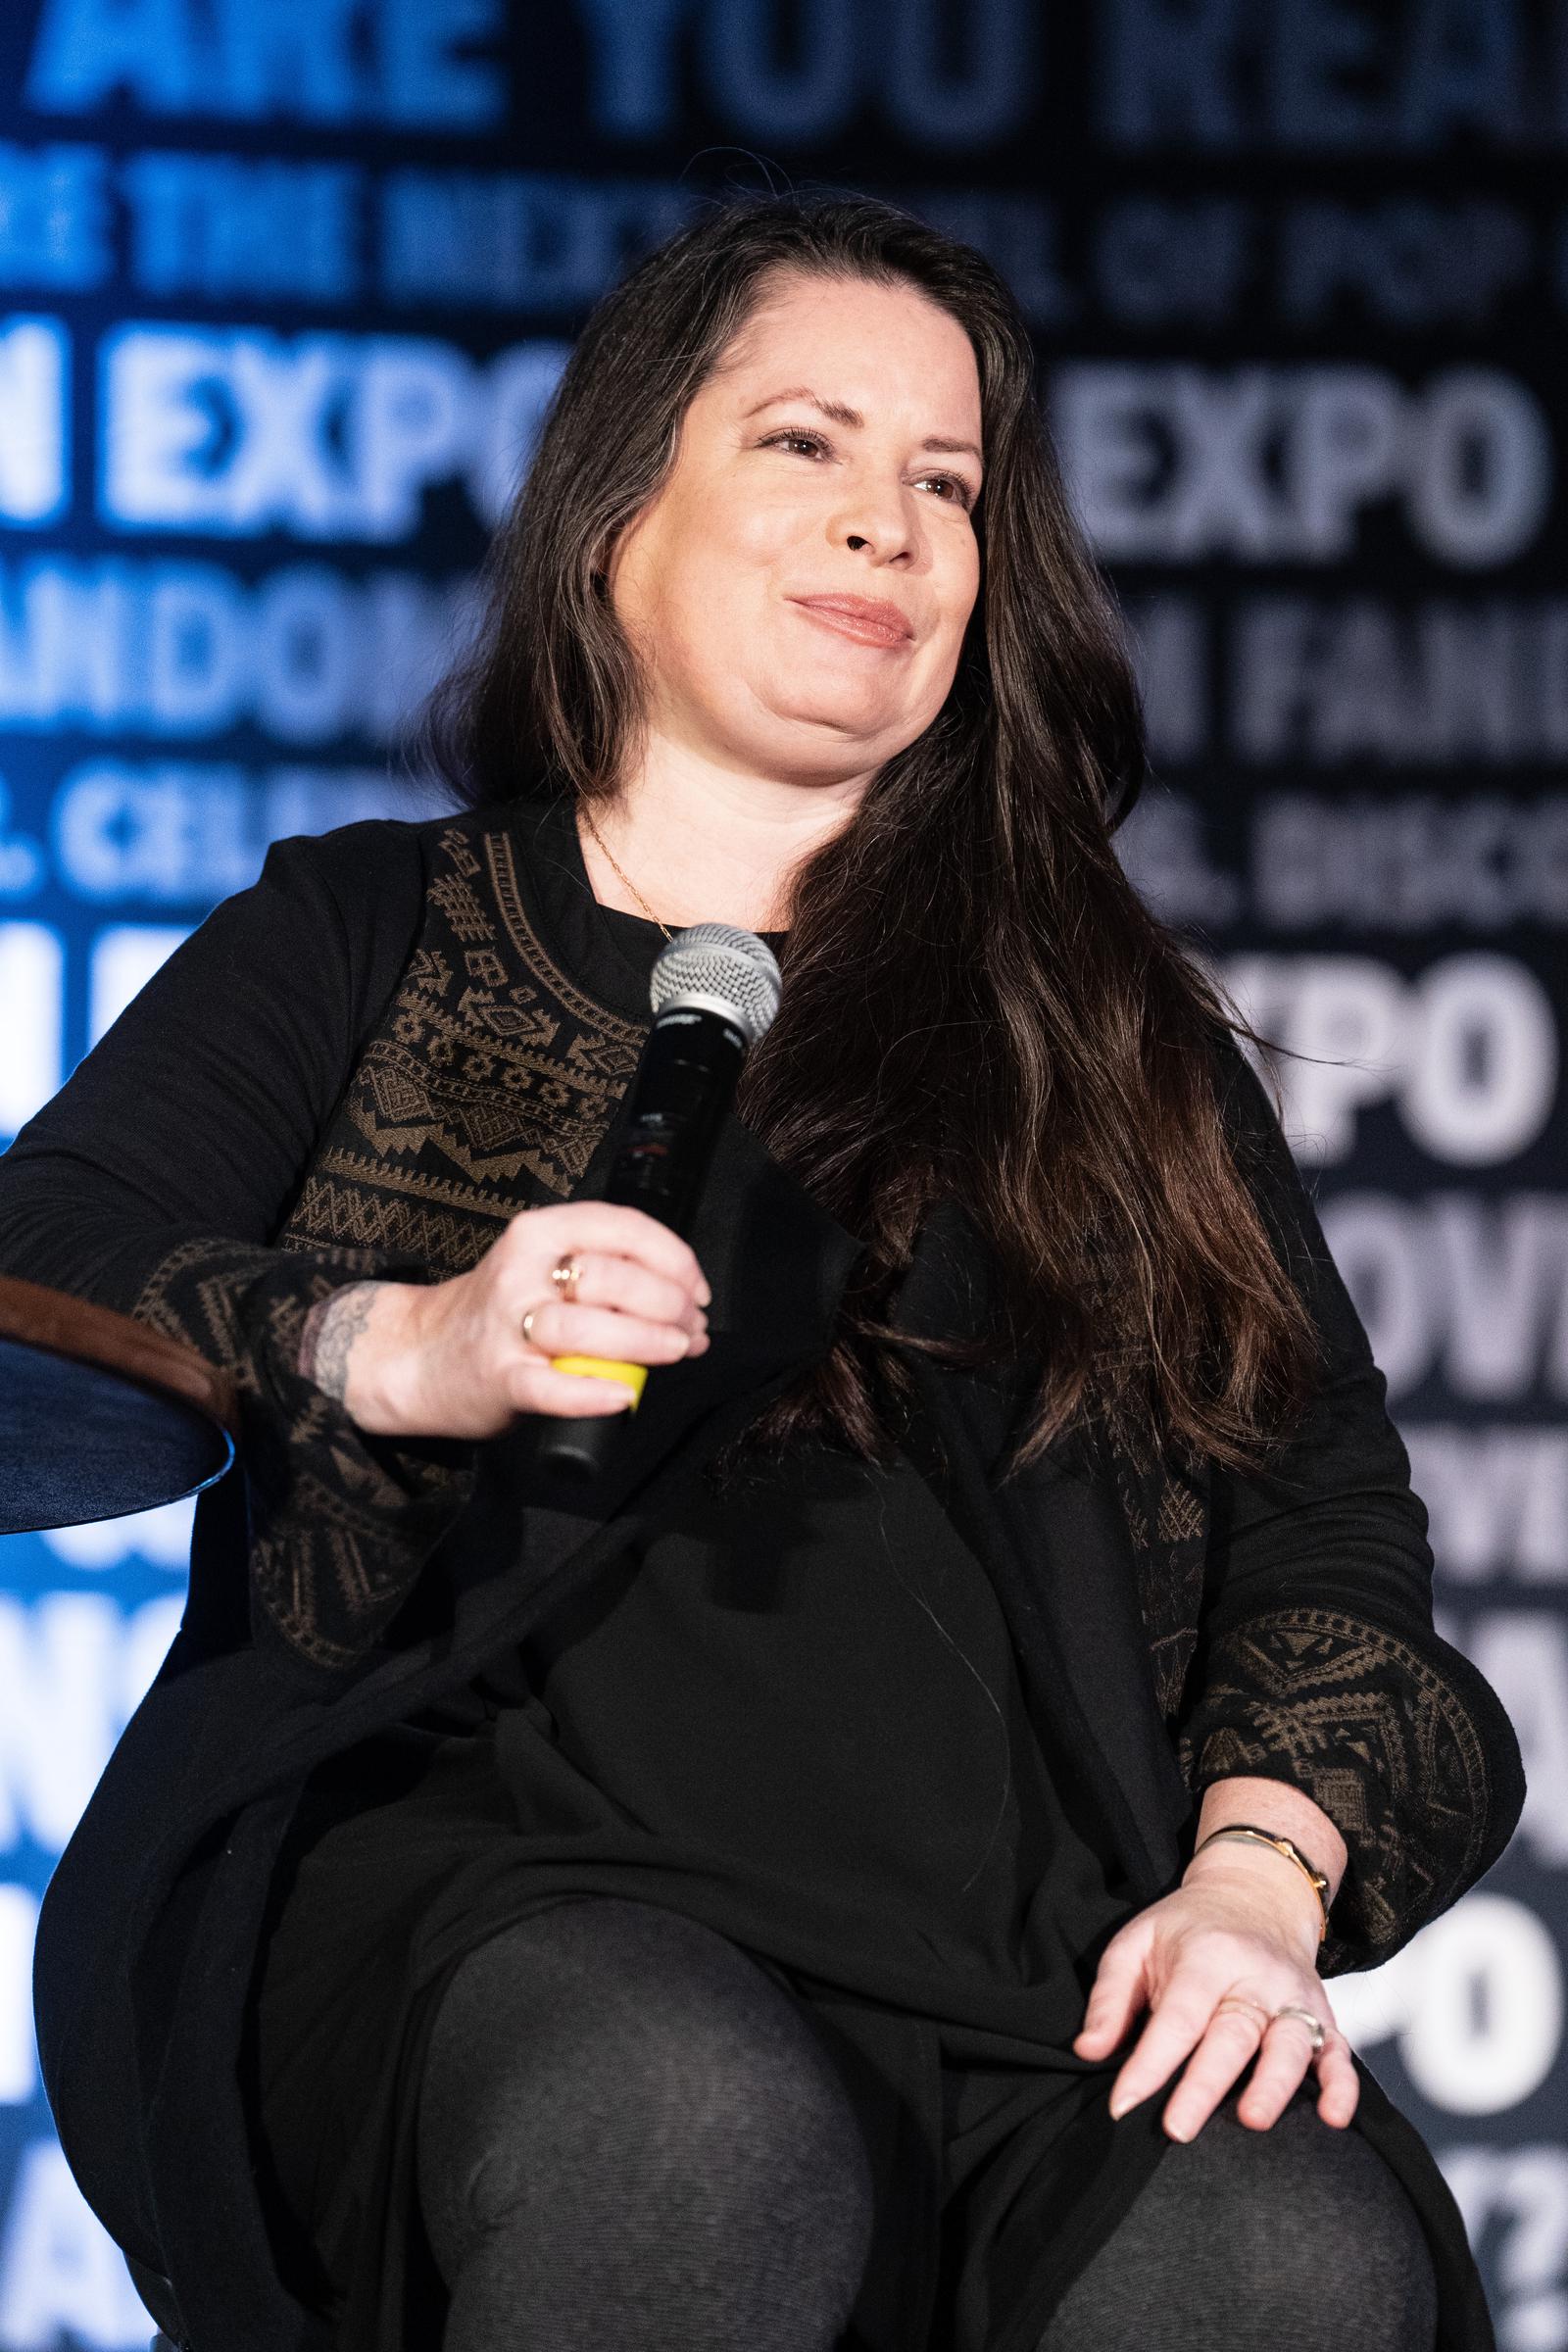 Holly Marie Combs besucht die FAN EXPO New Orleans in New Orleans, Louisiana, am 7. Januar 2024. | Quelle: Getty Images